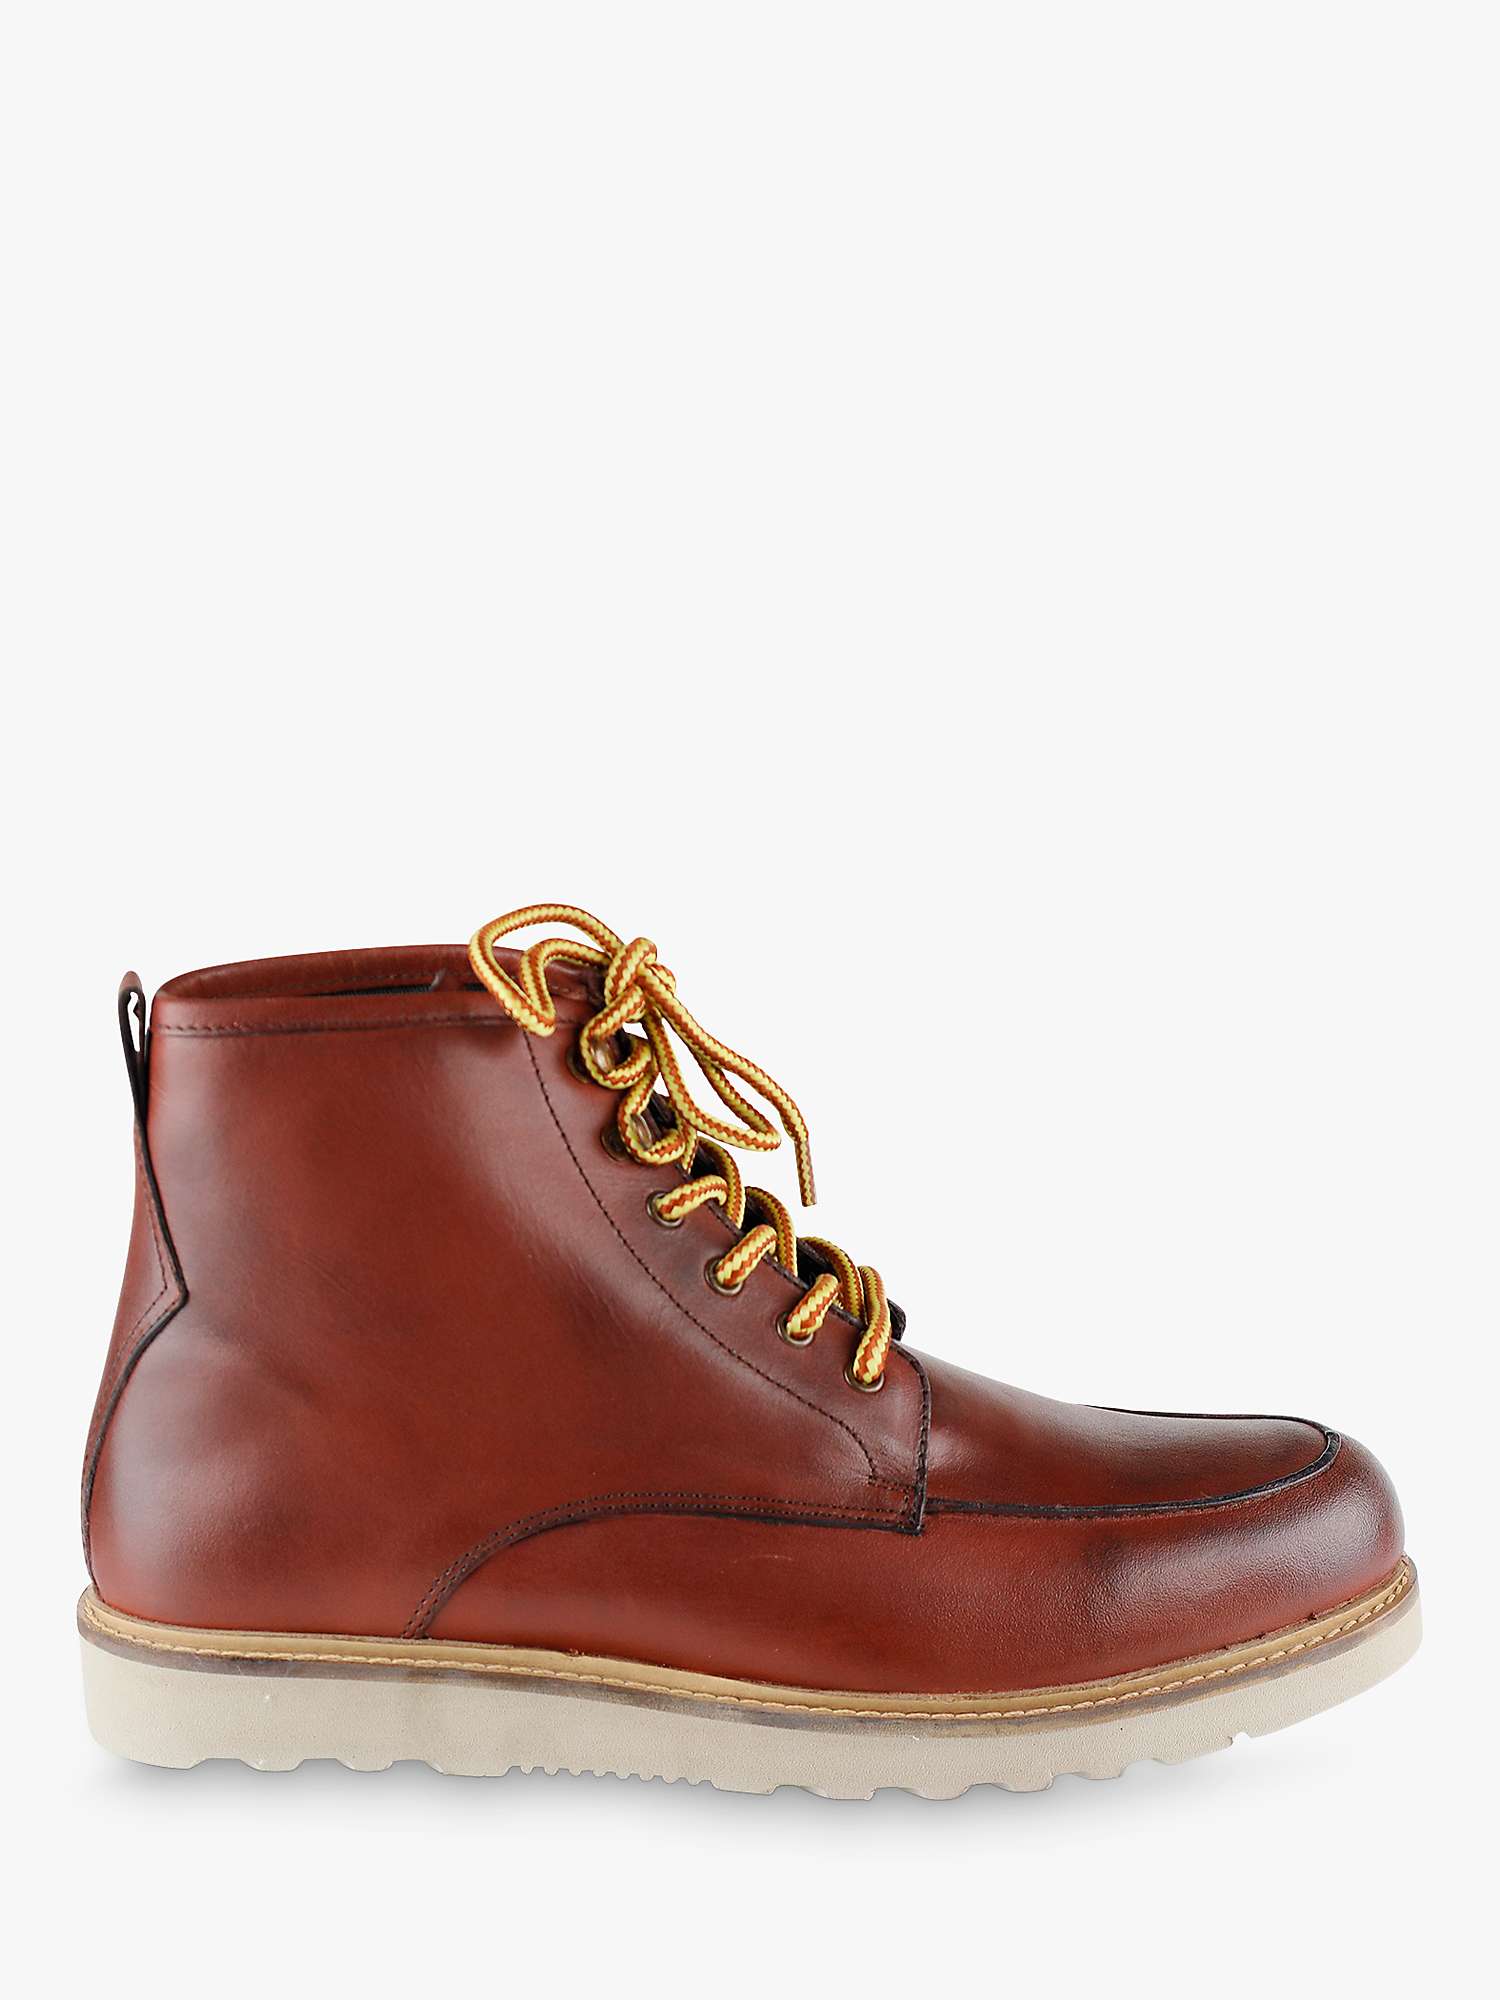 Buy Silver Street London Fisher Leather Lace Up Boots Online at johnlewis.com